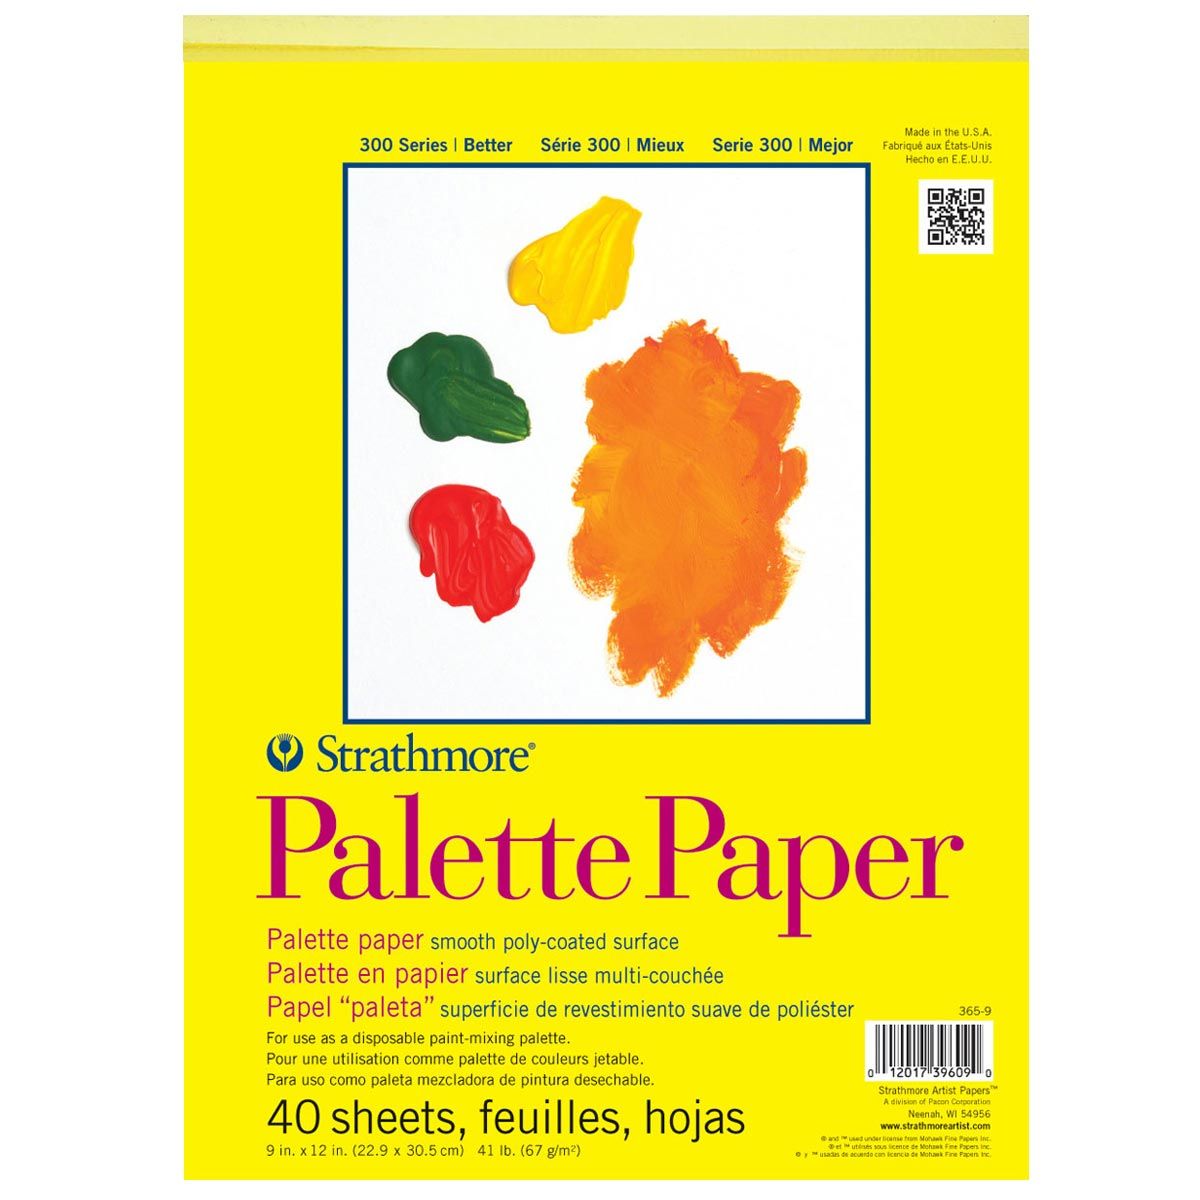 Strathmore 300 Series Palette Paper 40 Sheet Pad 9 x 12 inches